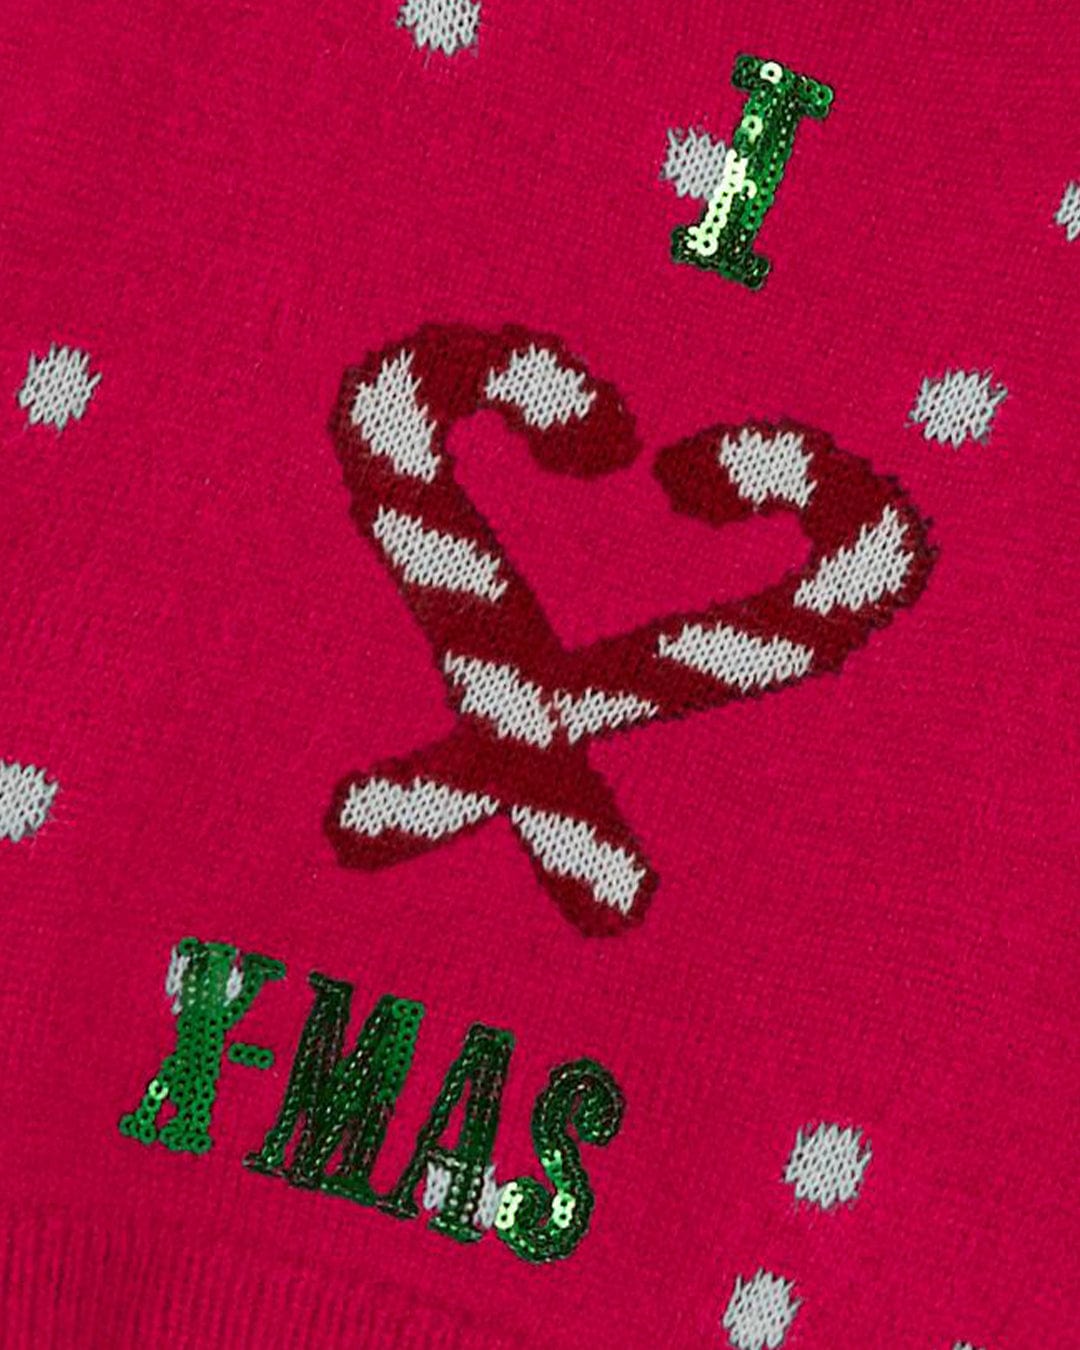 Name It Jumpers Name It I Love Christmas Red Jumper